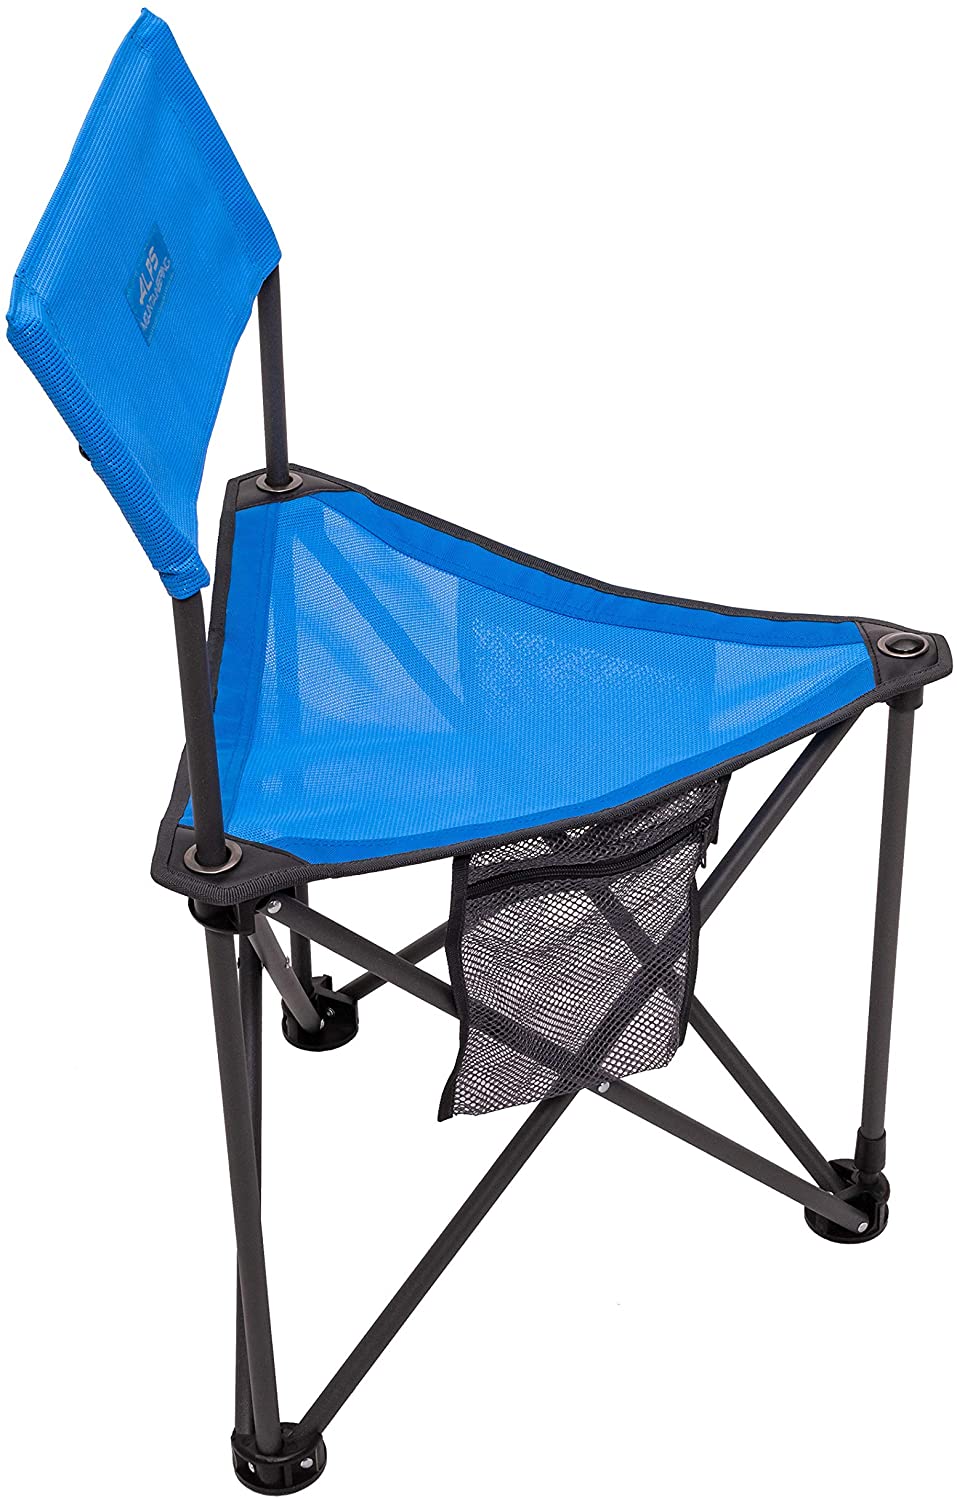 ALPS Mountaineering Grand Rapids Chair/Stool, Blue, One Size - AL8135002